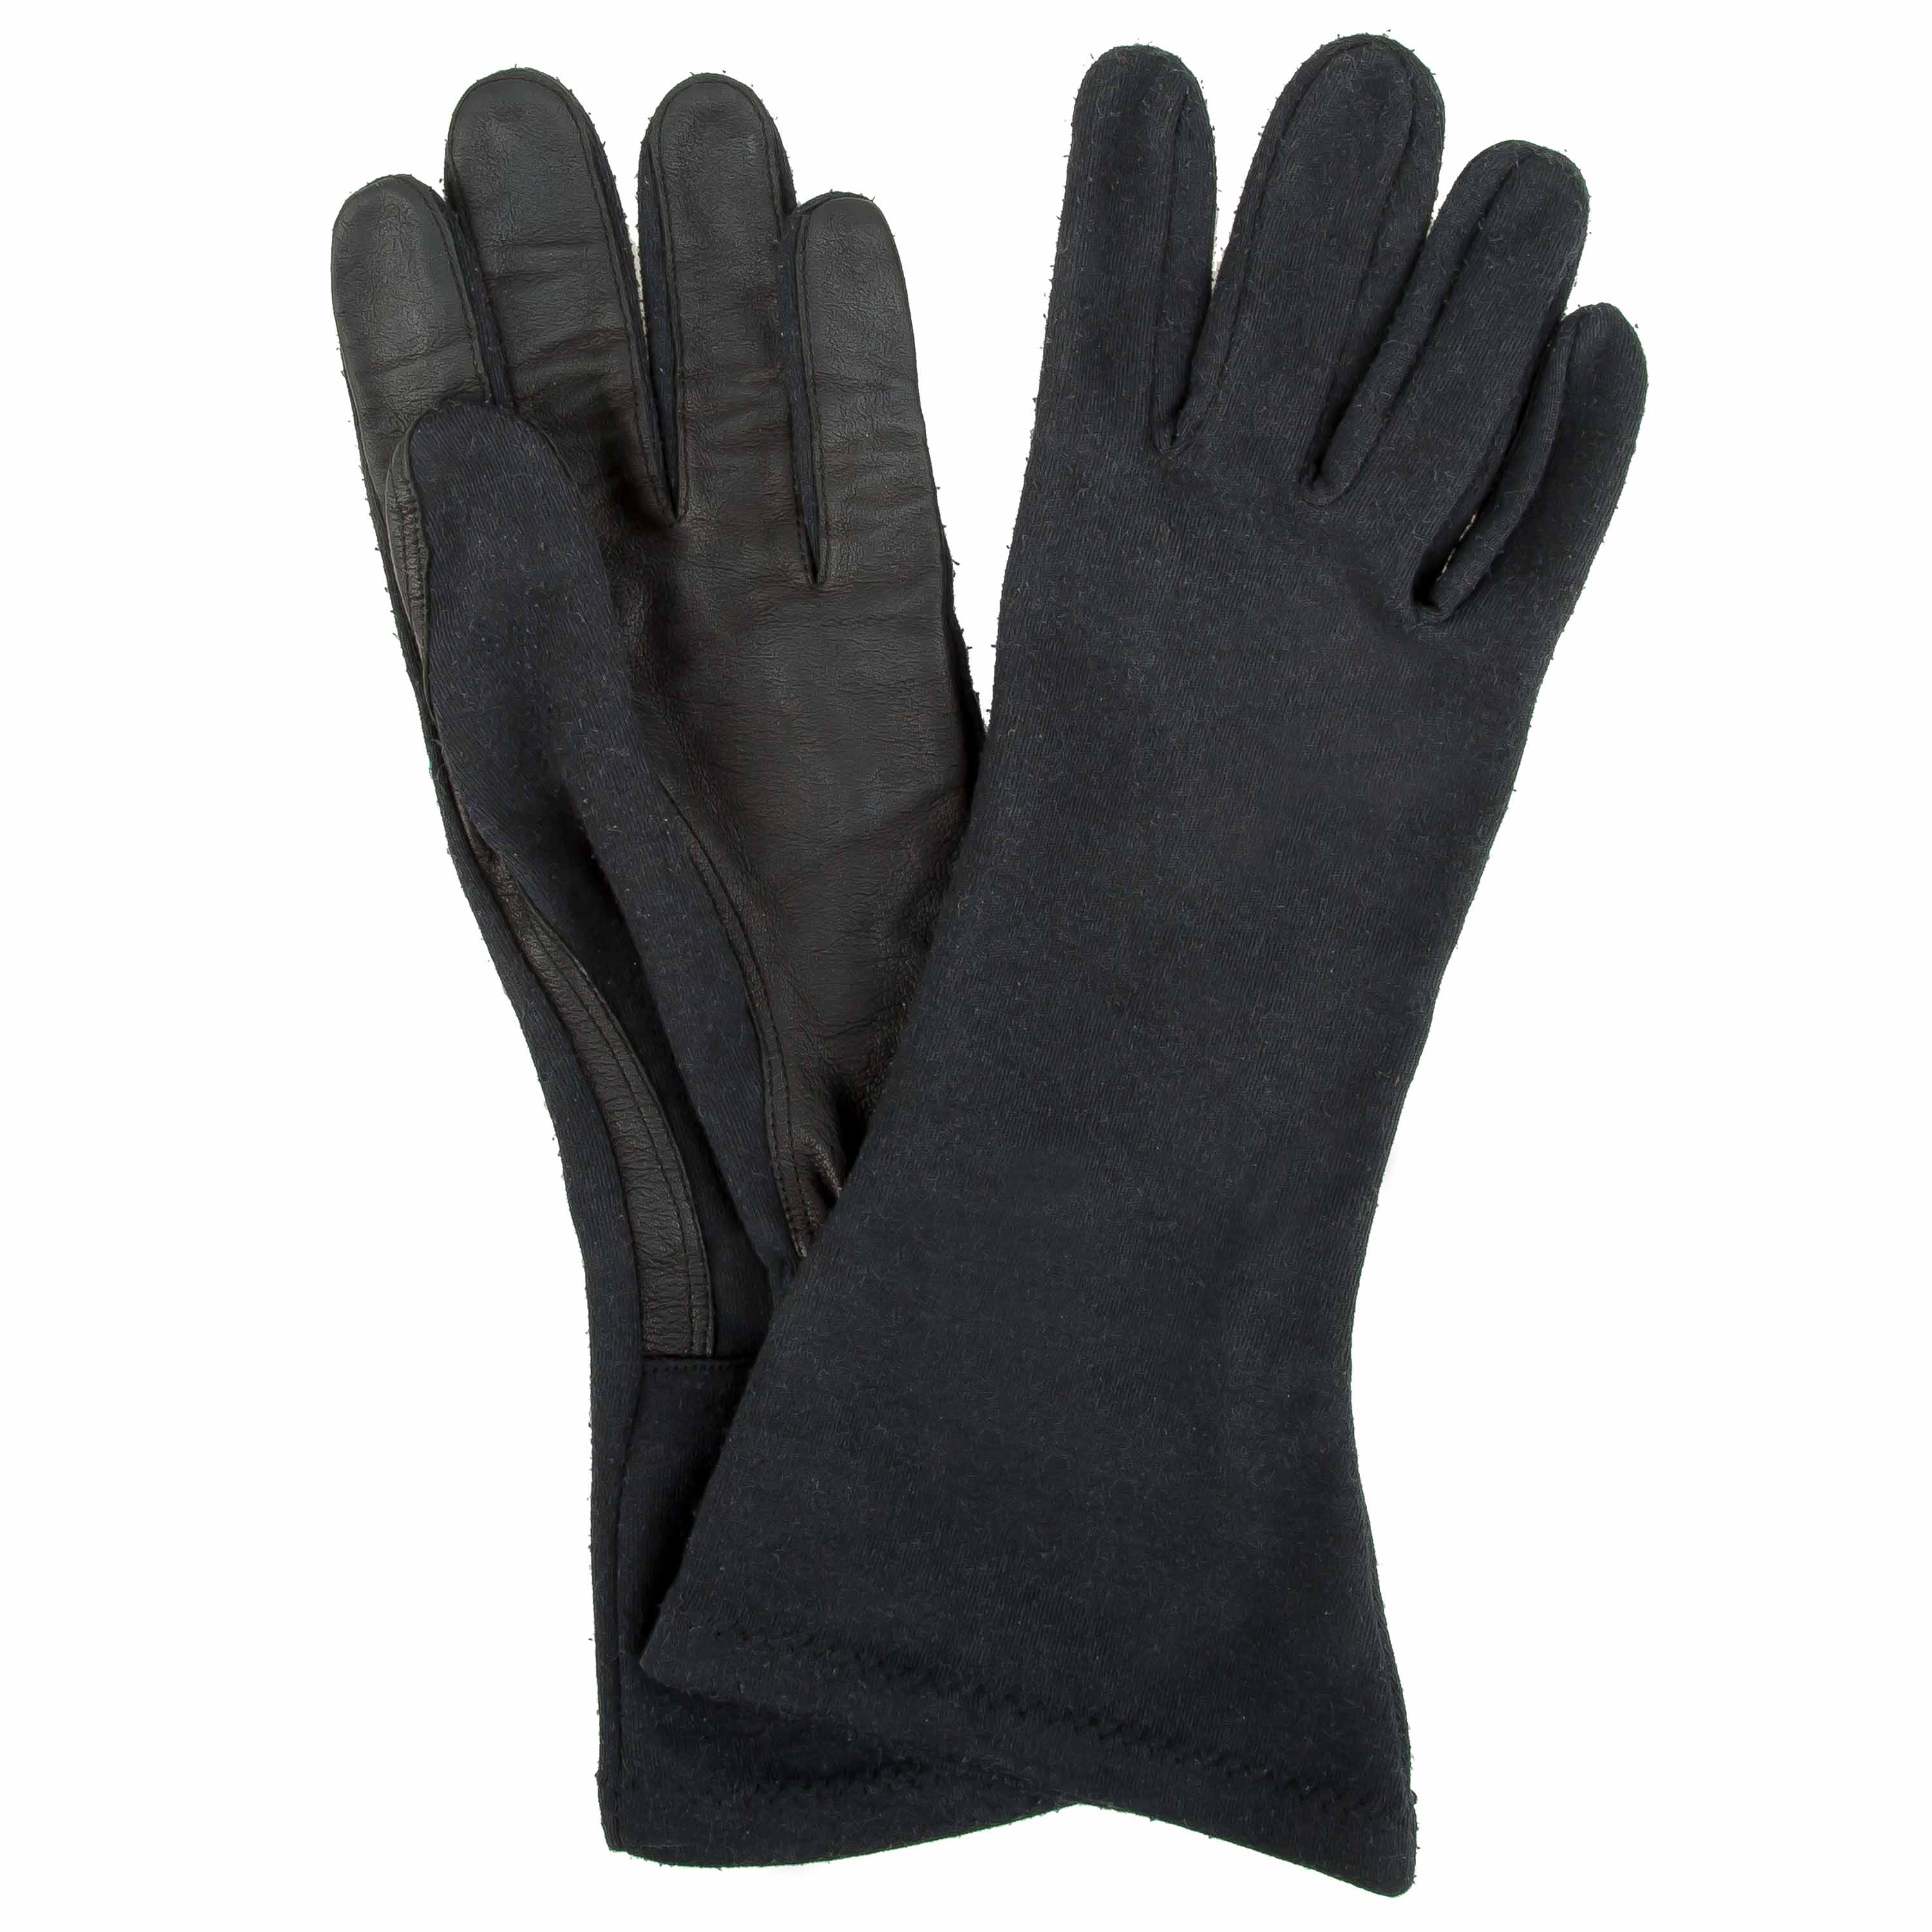 Purchase the Used BW Pilot Gloves Aramid Leather black by ASMC